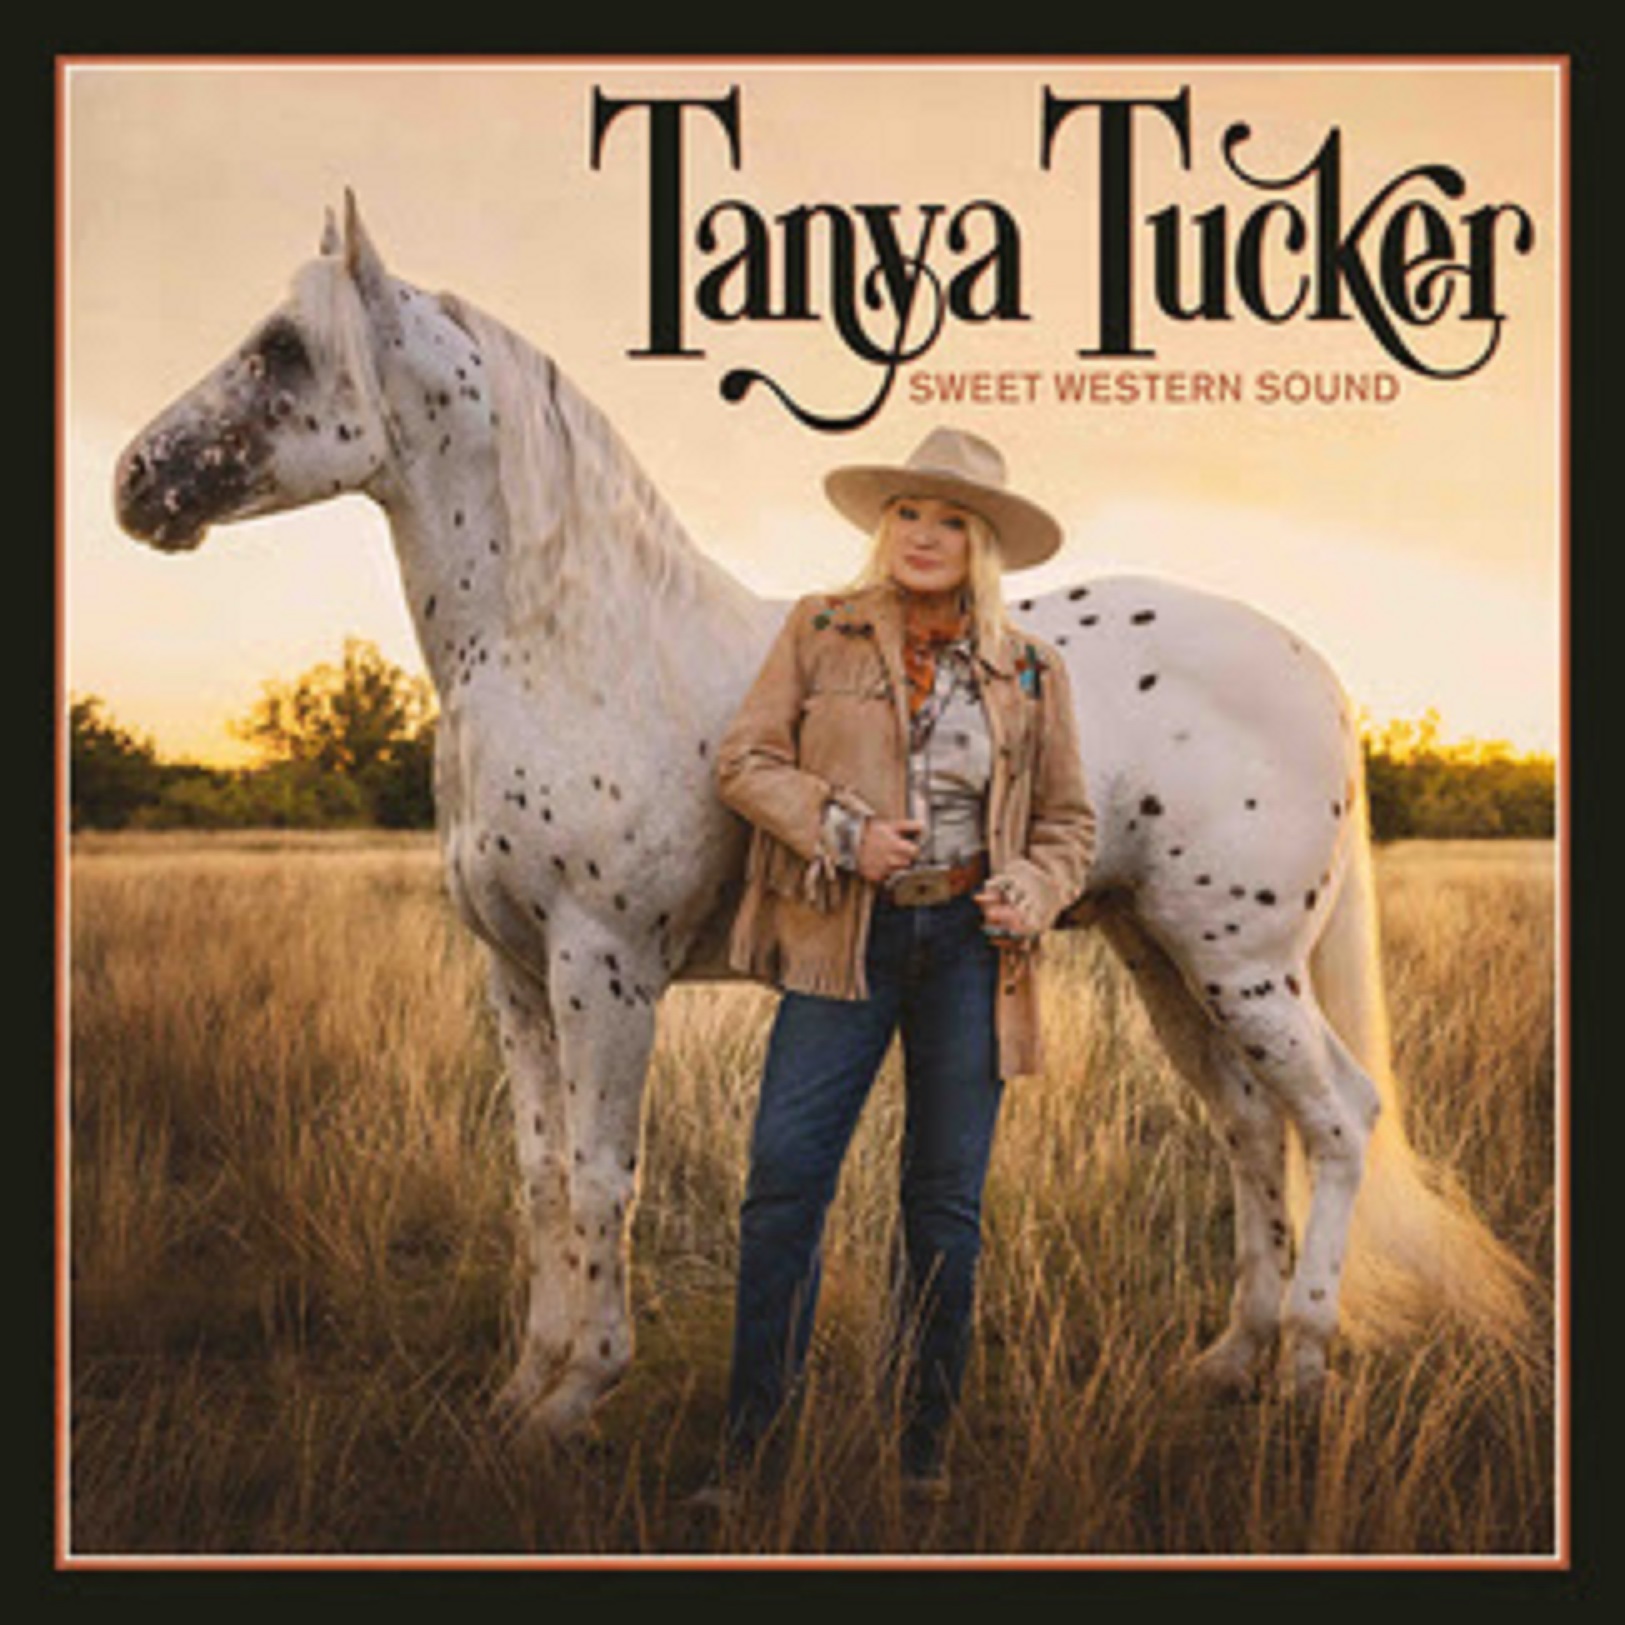 Tanya Tucker’s anticipated new album "Sweet Western Sound" out today